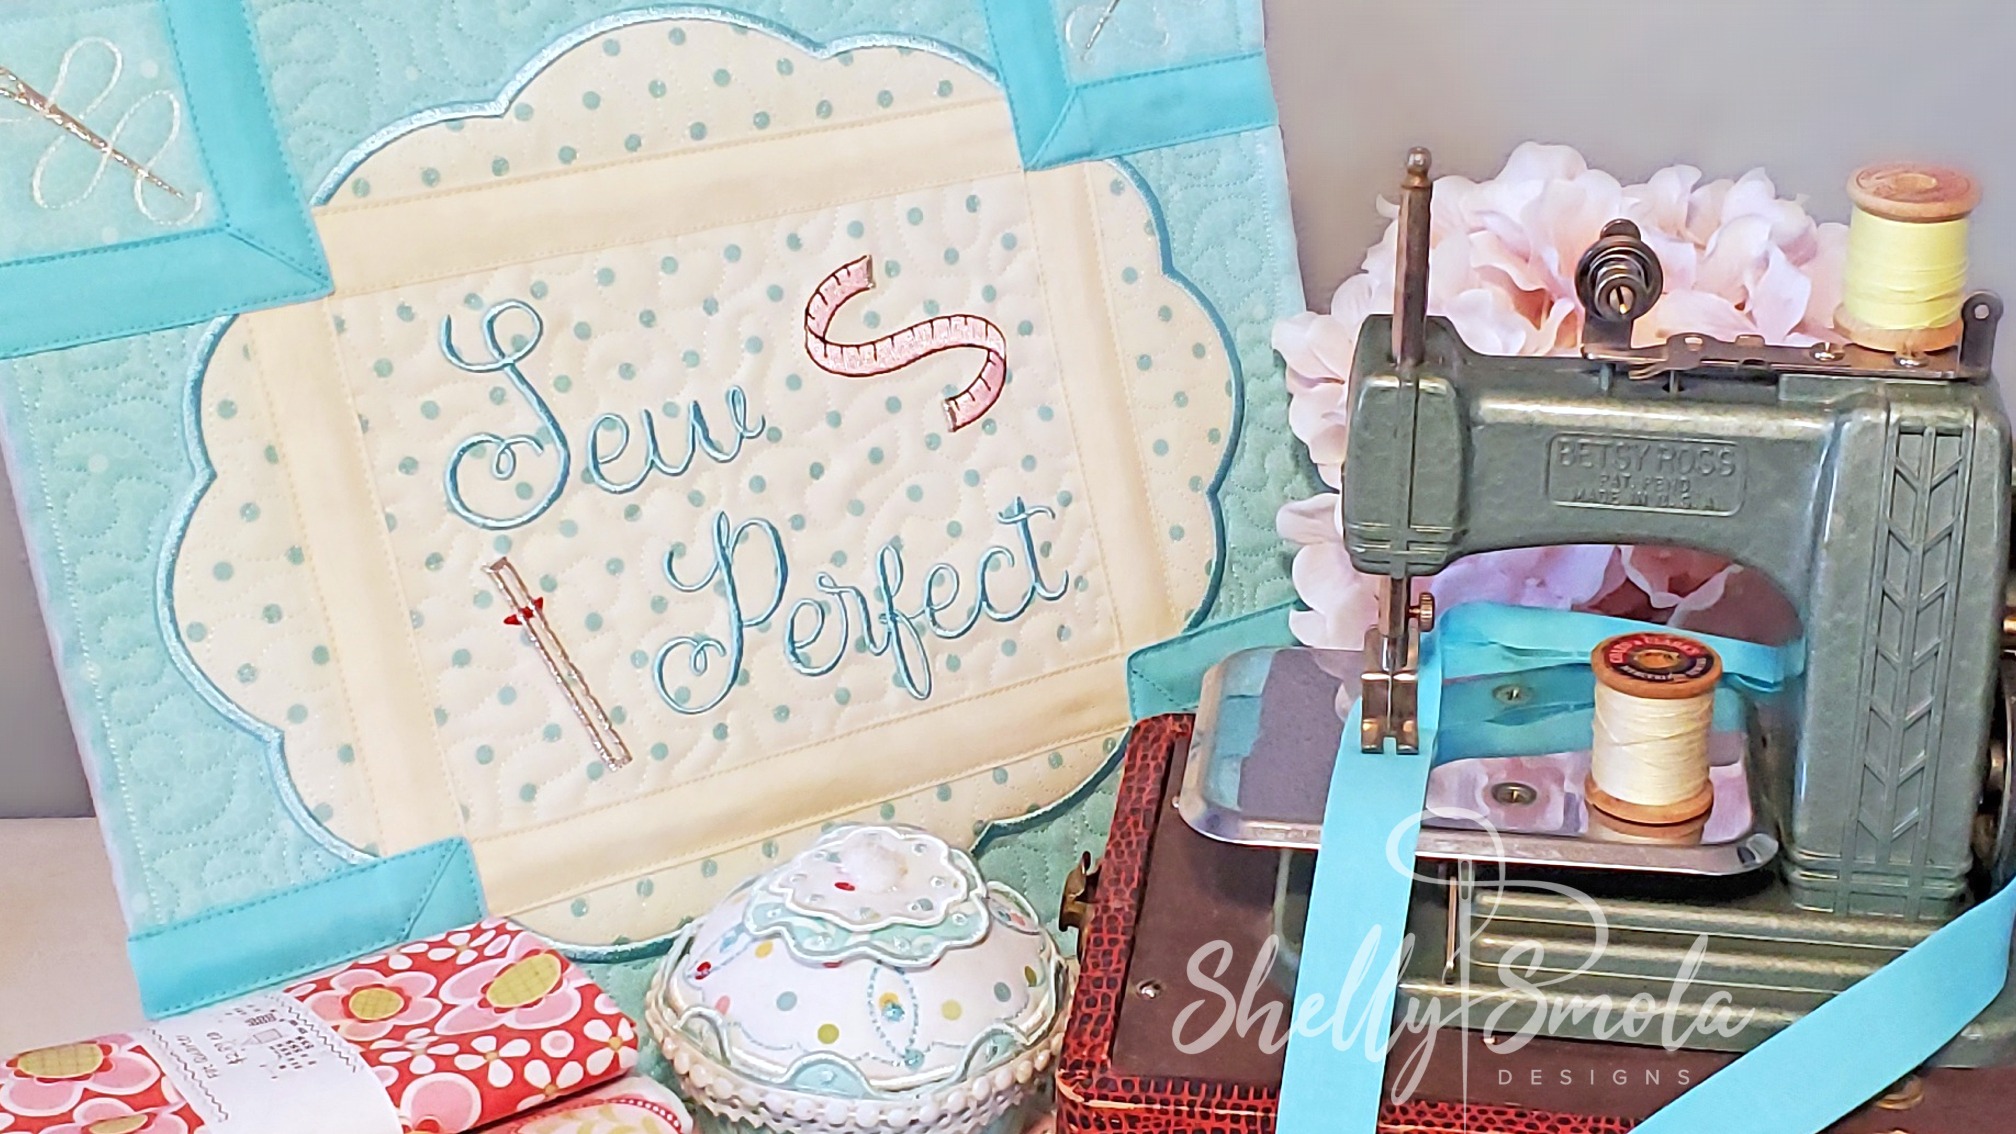 Sew Perfect by Shelly Smola